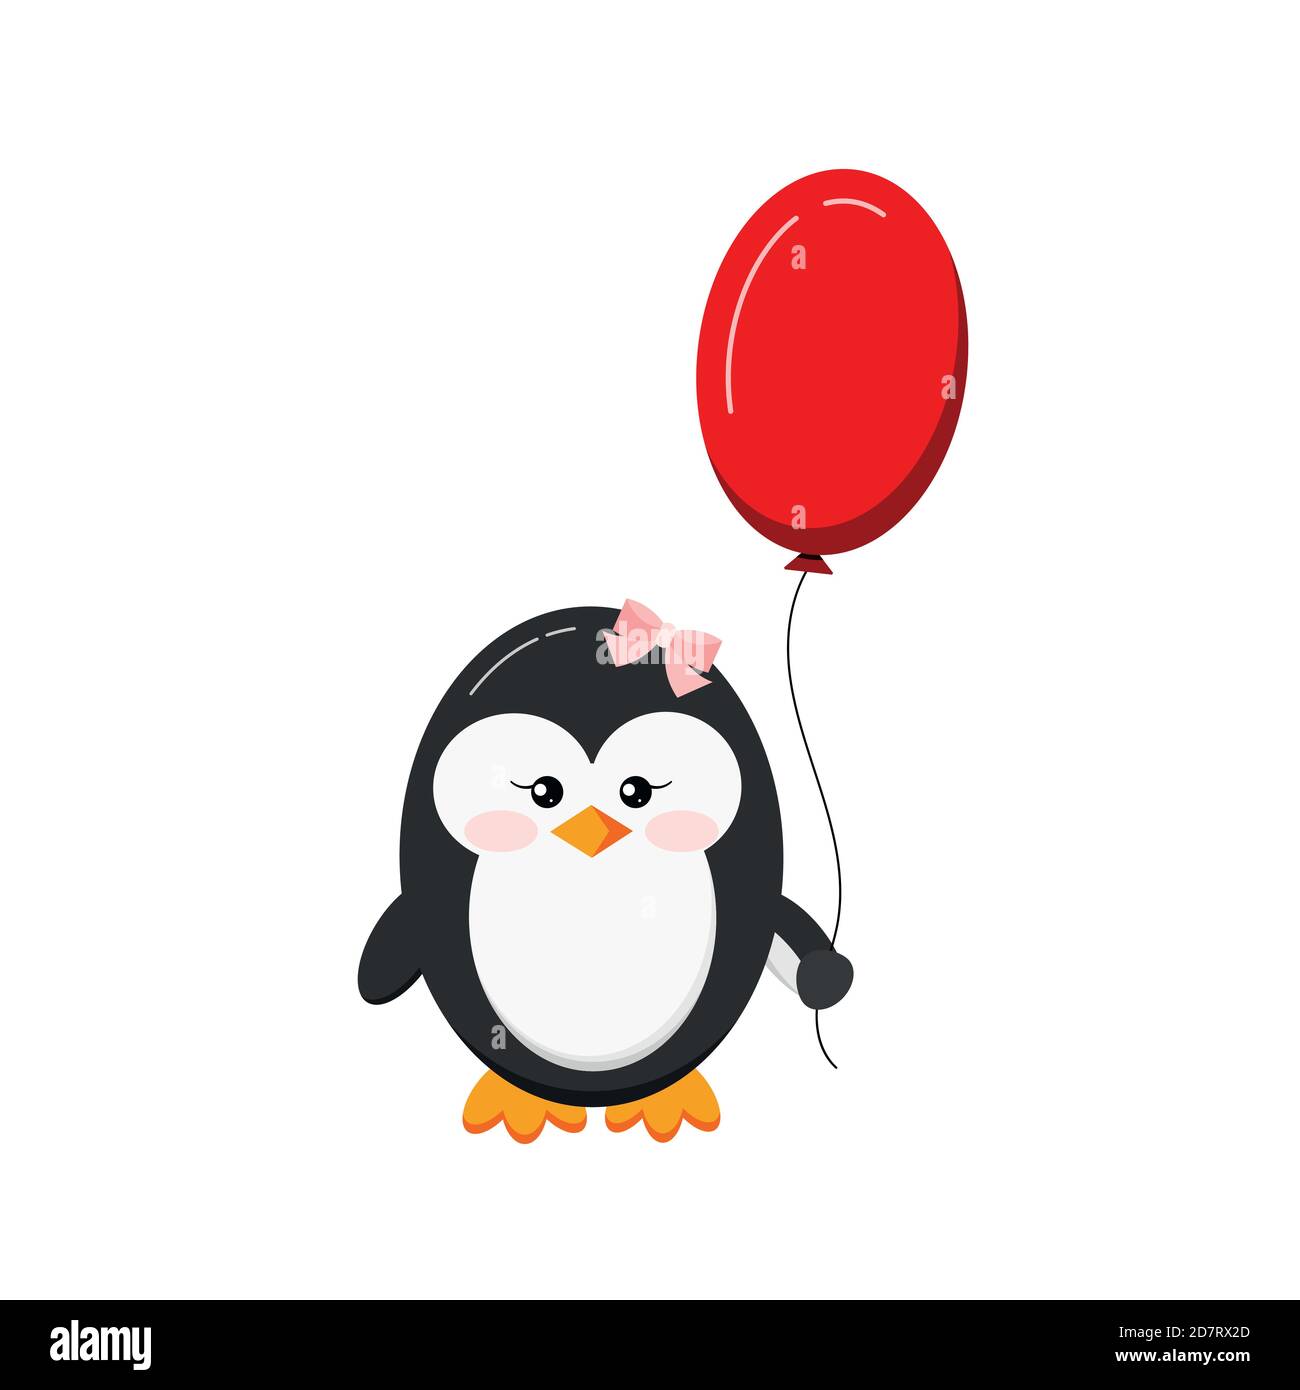 Penguin Balloon High Resolution Stock Photography and Images - Alamy